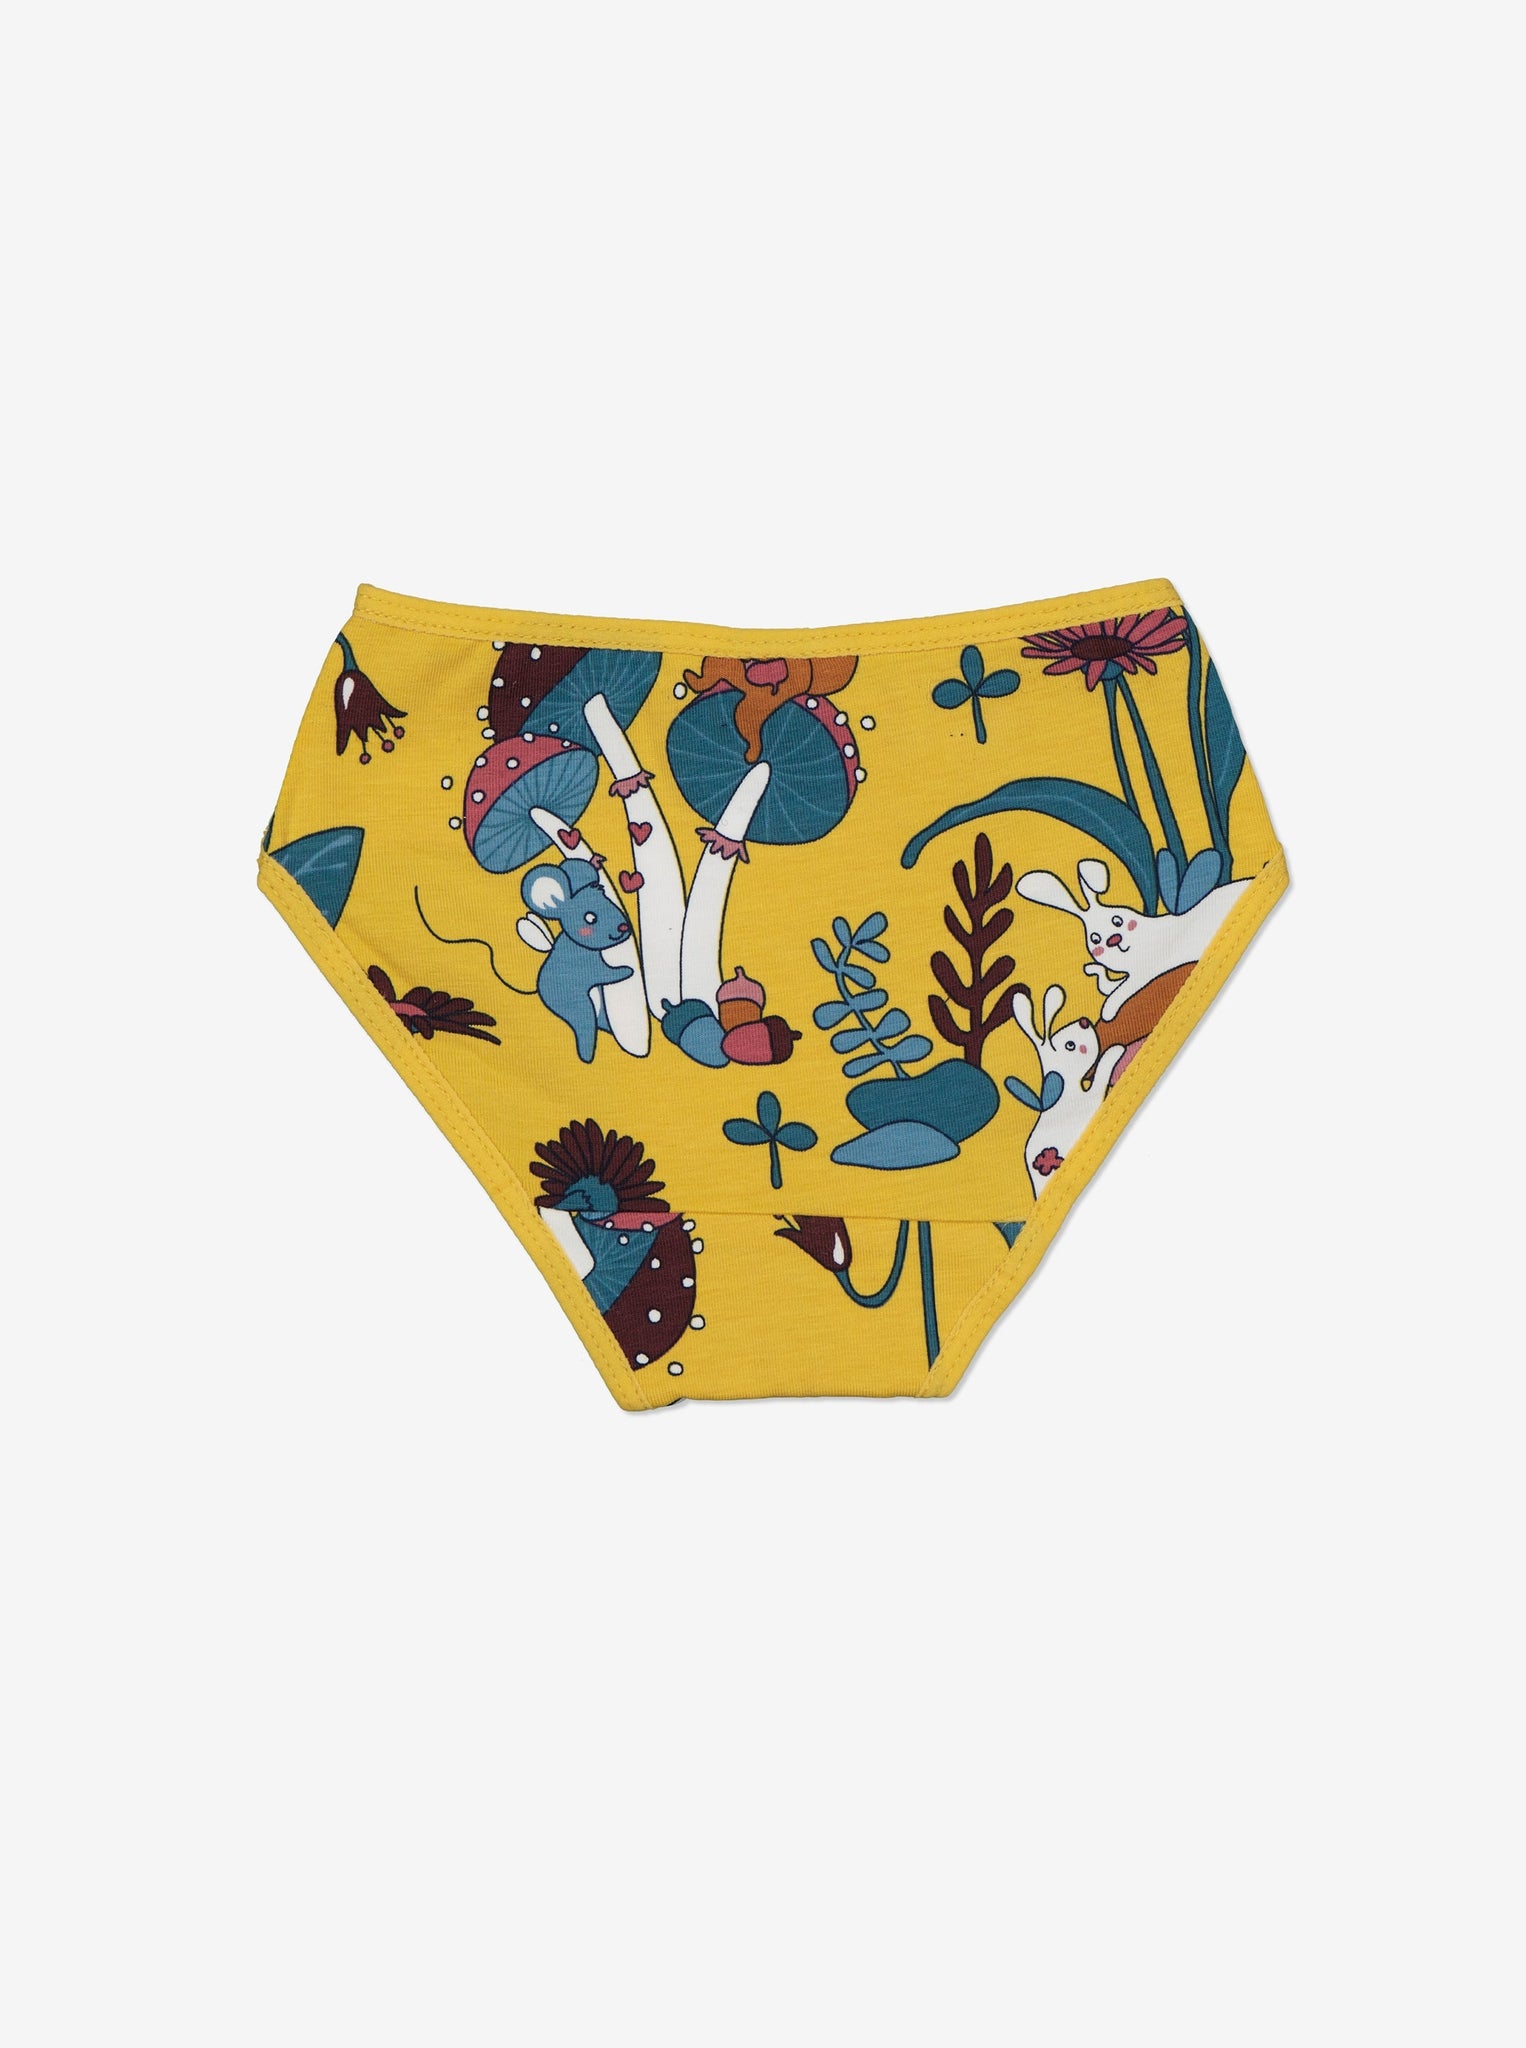 Yellow Organic Cotton Girls Briefs from the Polarn O. Pyret kidswear collection. The best ethical kids clothes